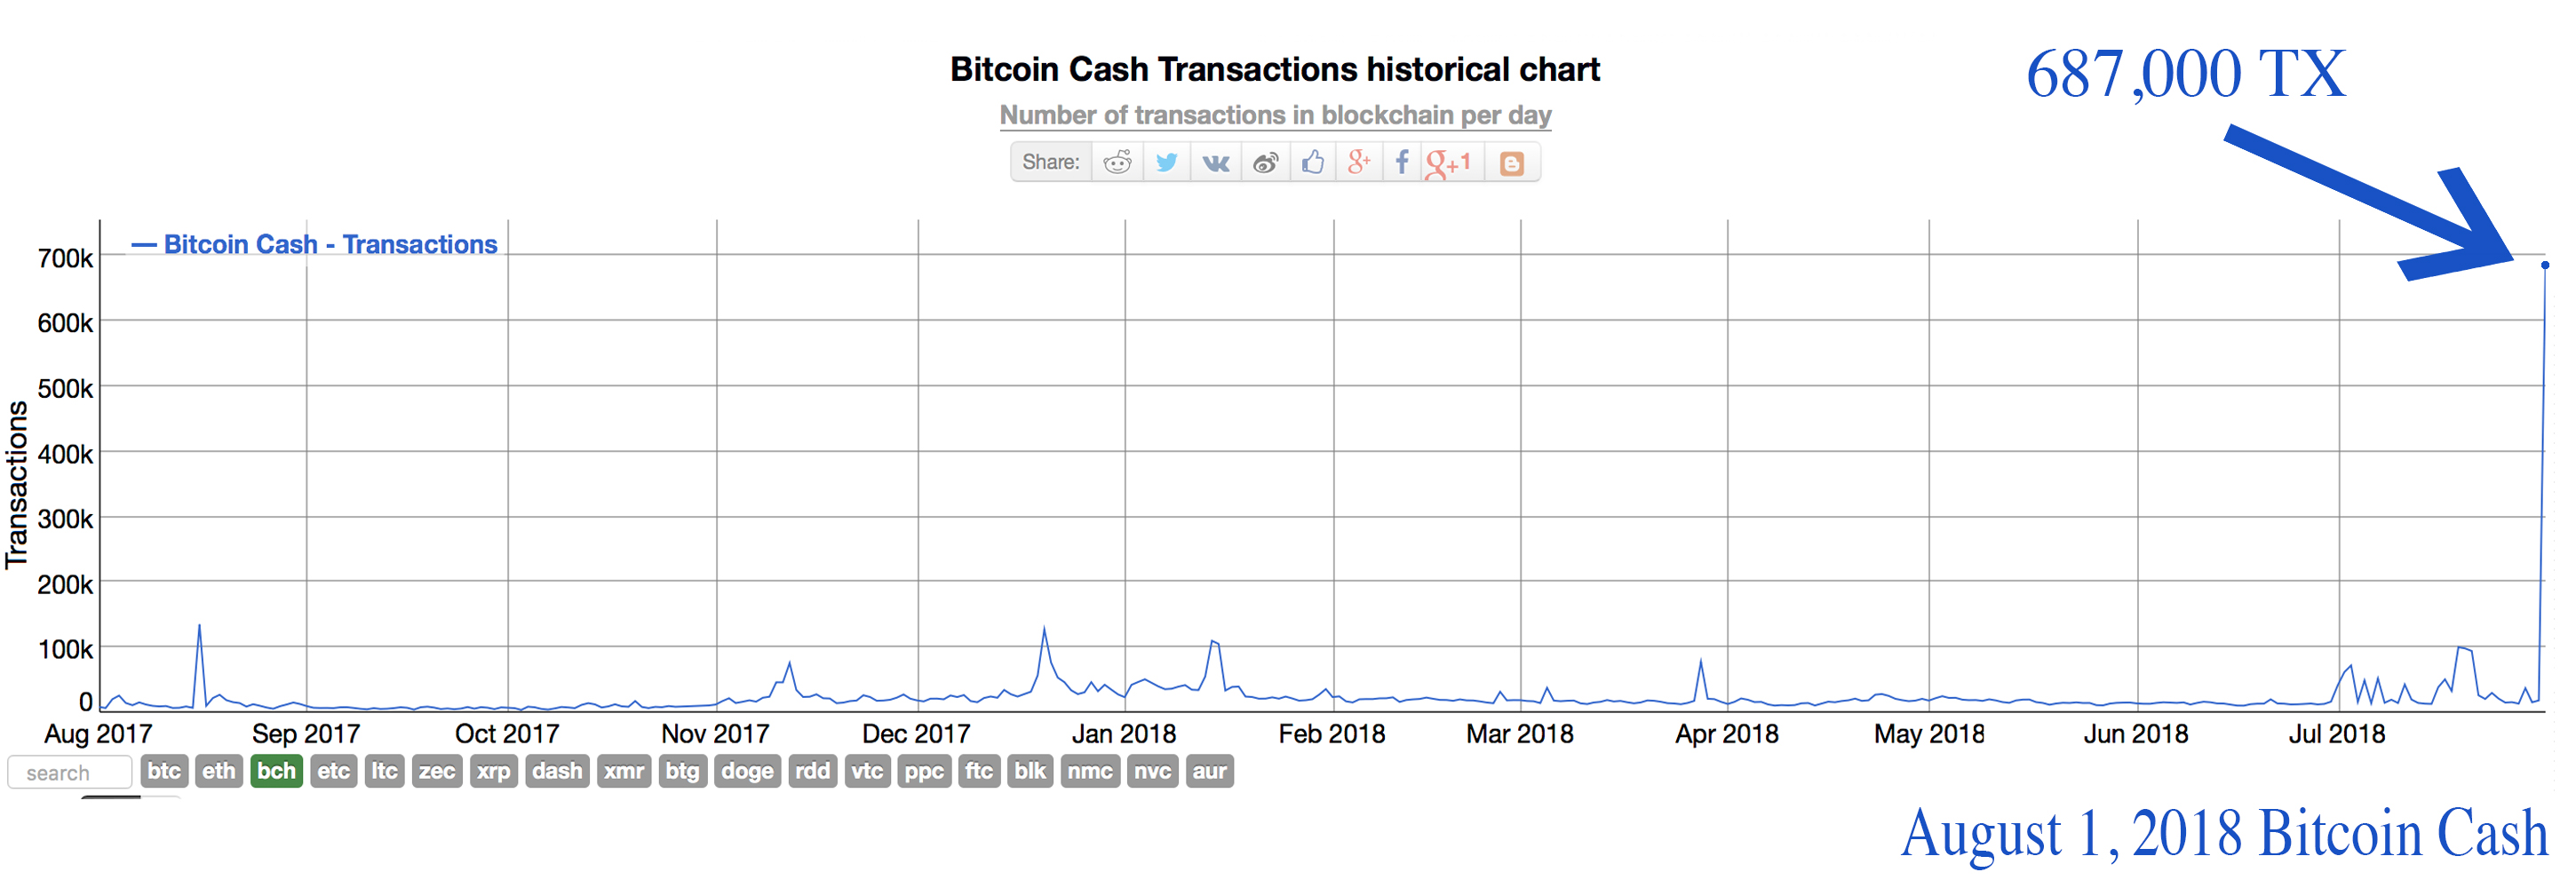 The Bitcoin Cash Network Processed 687 000 Transactions On August - 